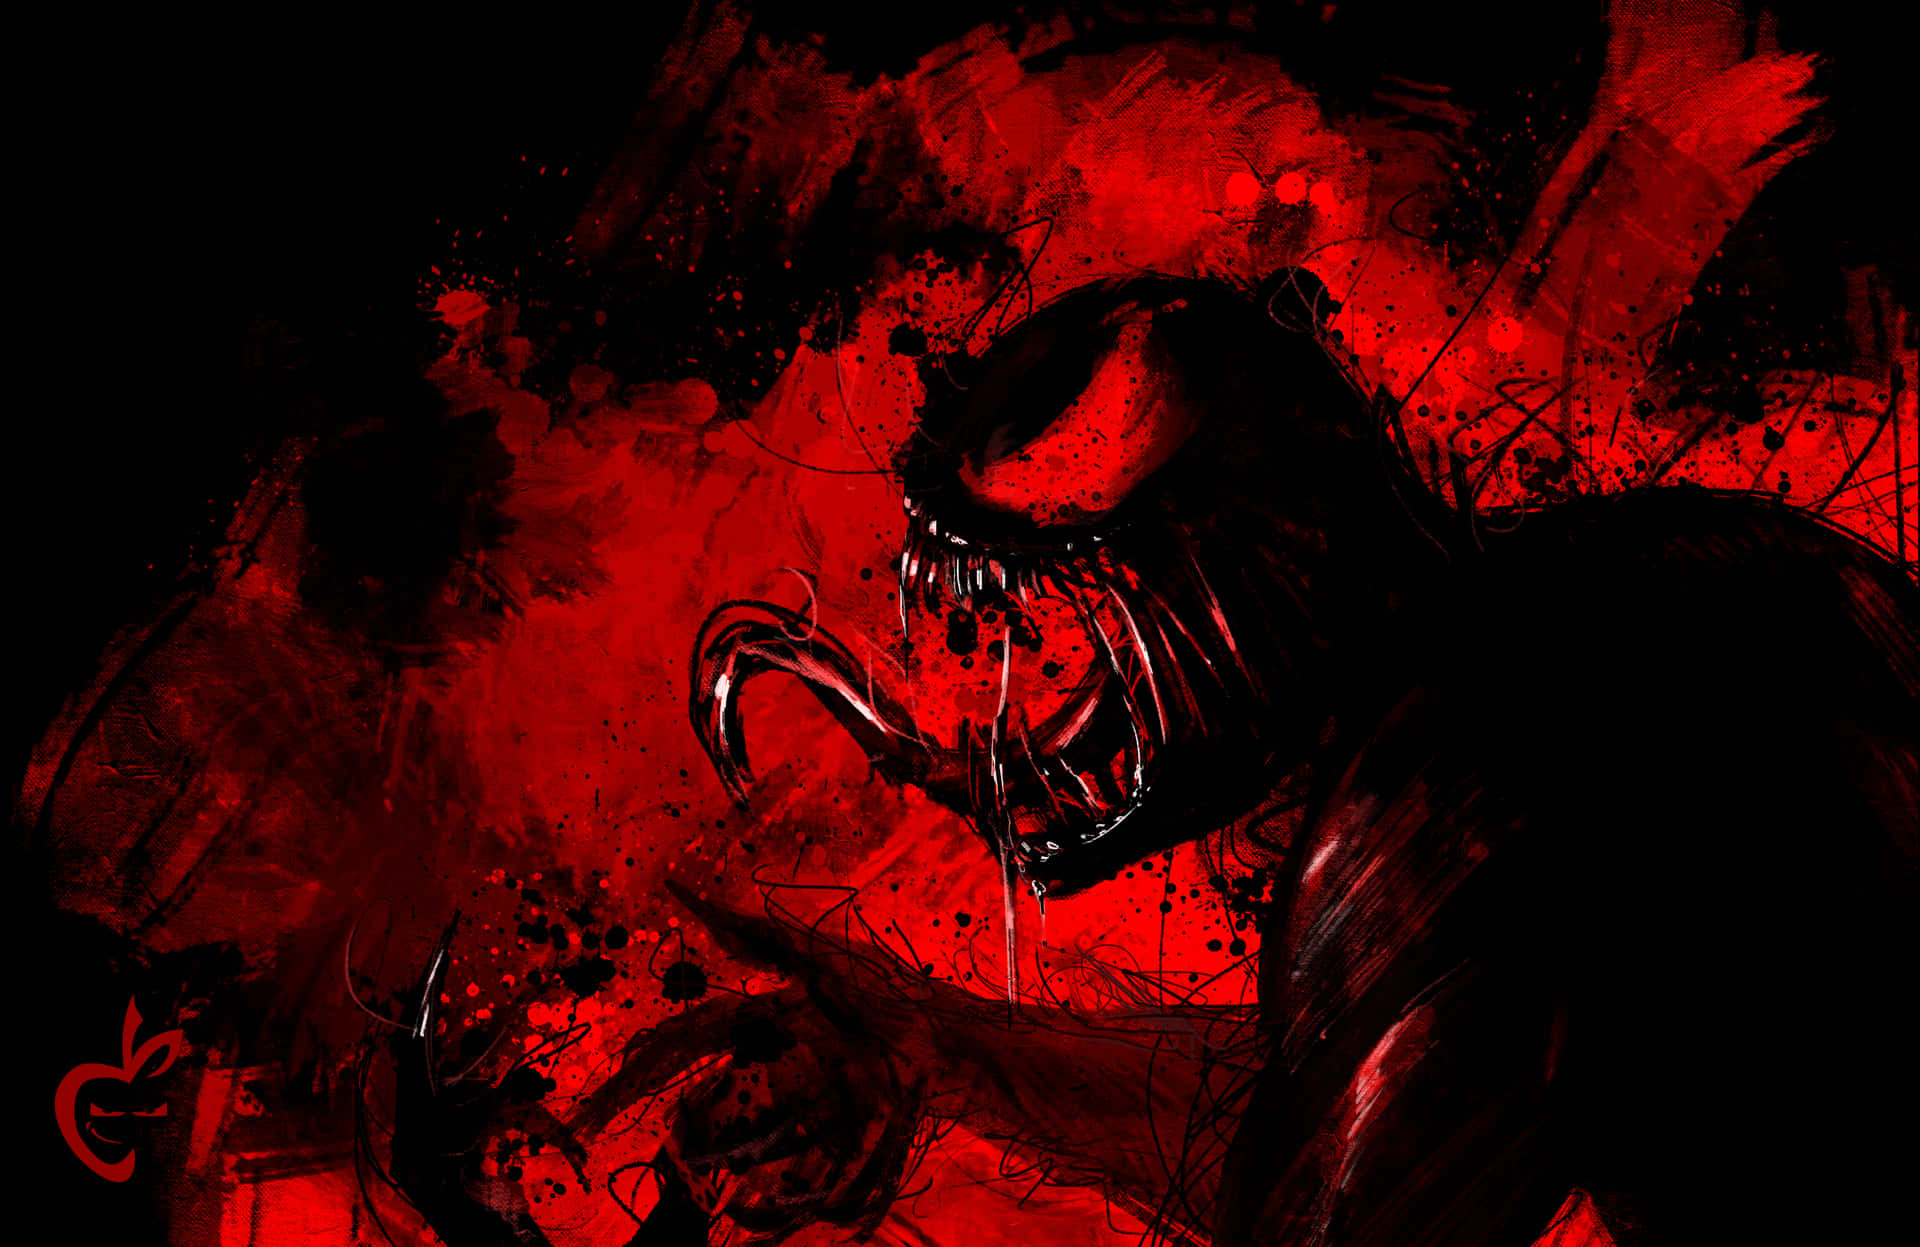 "From Venom to Carnage: Face the Merciless Power of the Symbiote" Wallpaper